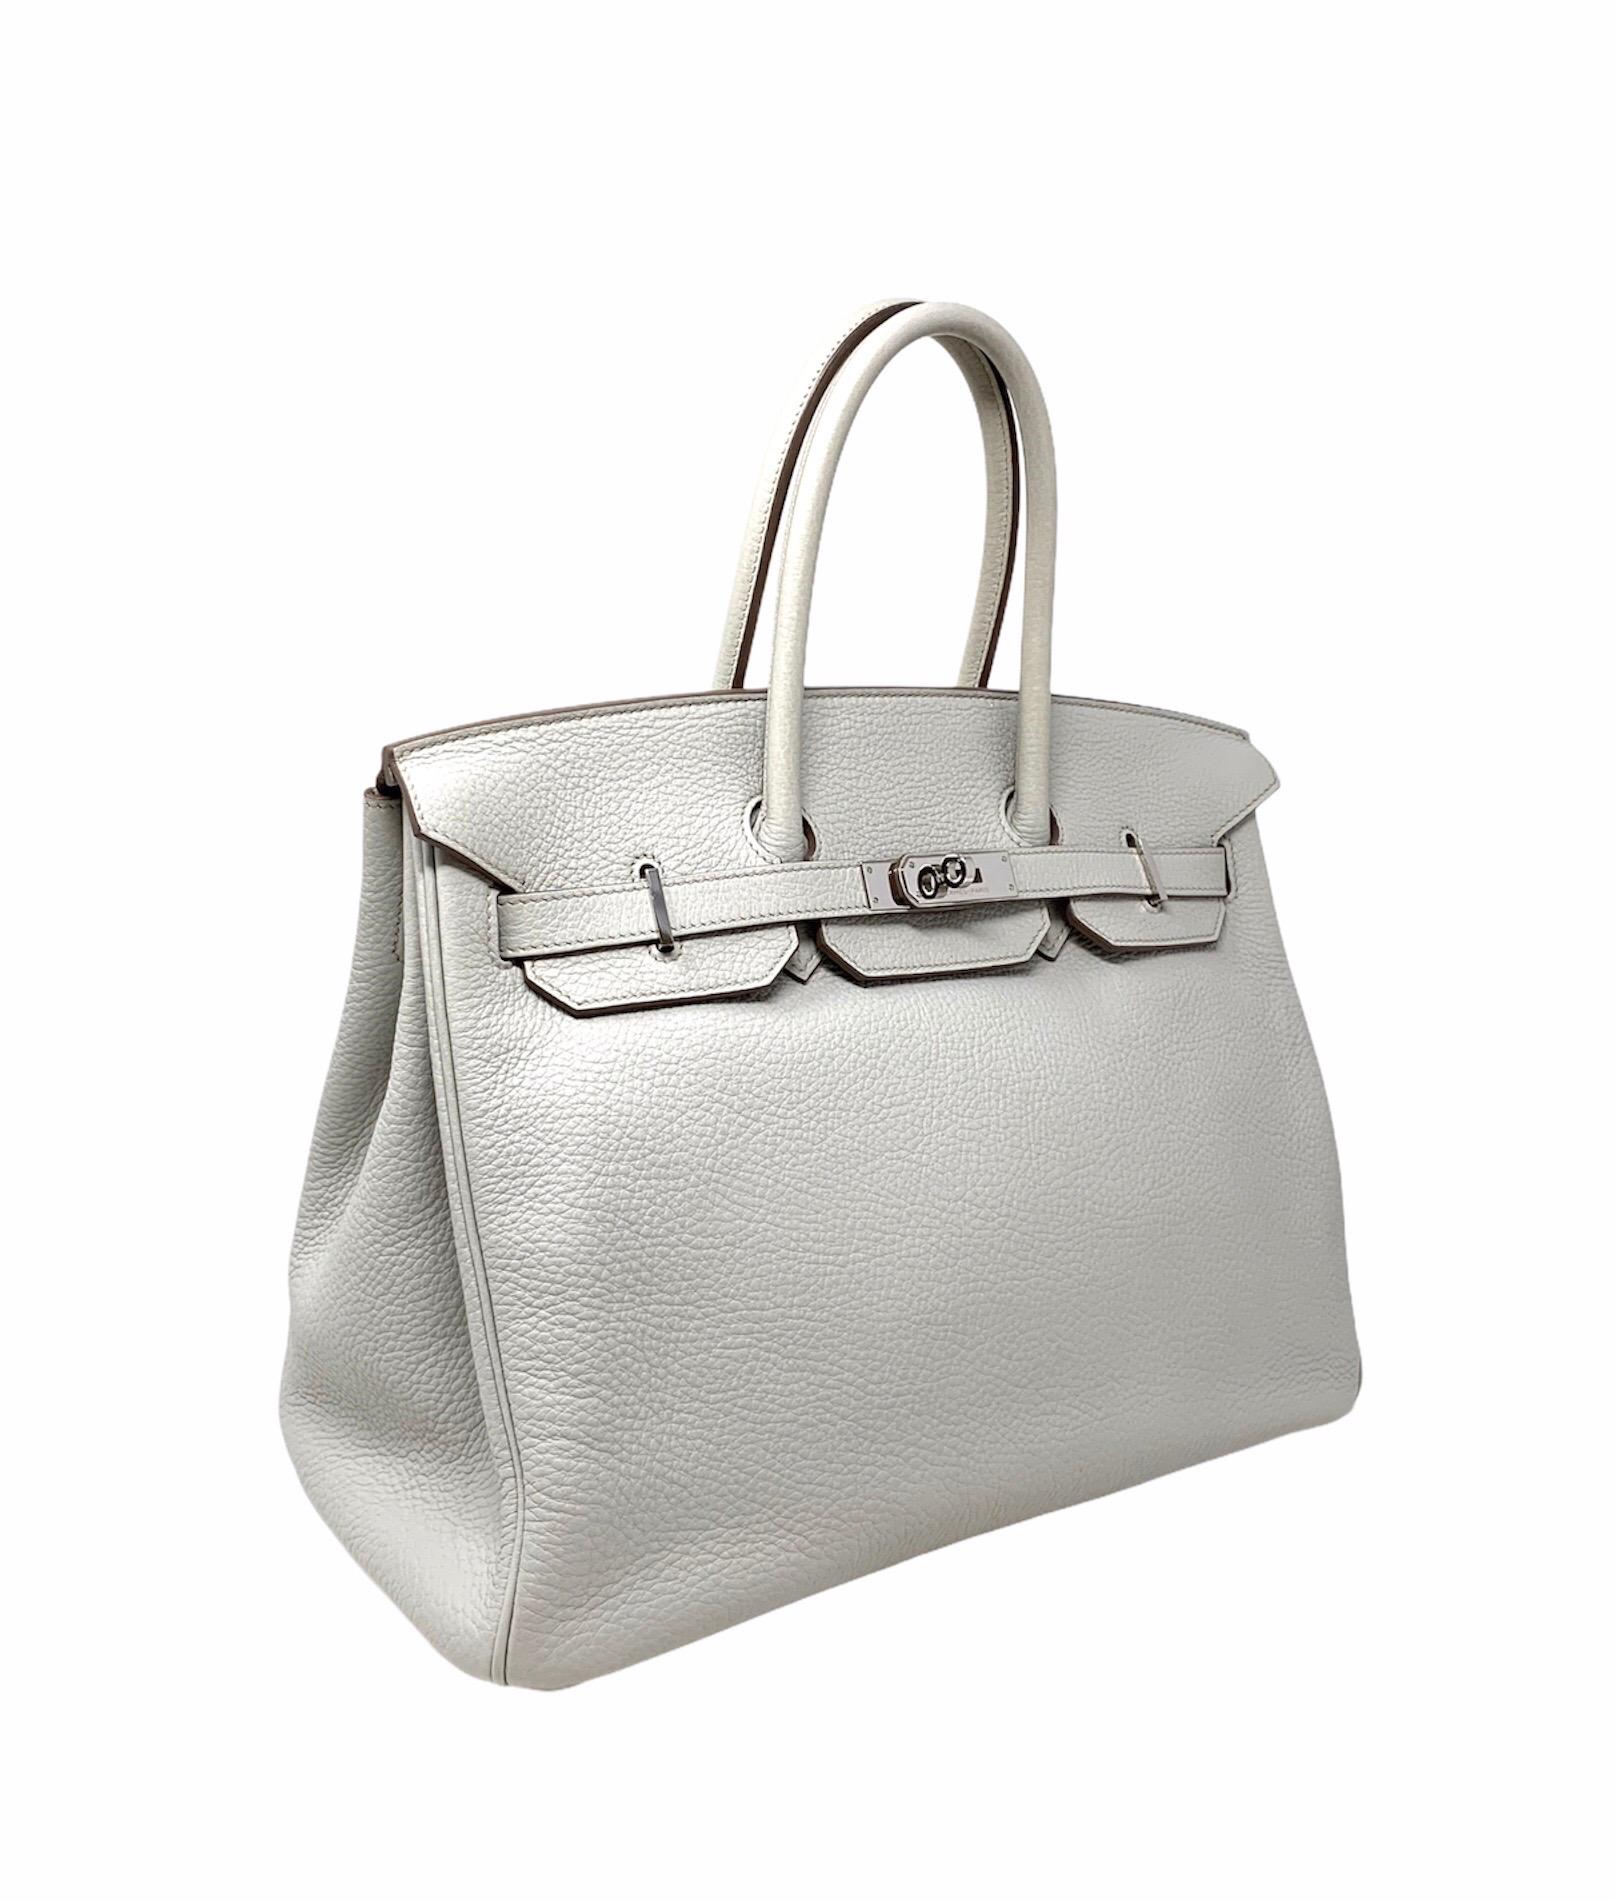 Hermes Paris Birkin 35 Beton color in veau Togo year 2011 stamp O in the square excellent condition complete with padlock, keys and clochette, Hdw silver
It is worn by hand. Dust-bag included, no box.
Packing: Dustbag